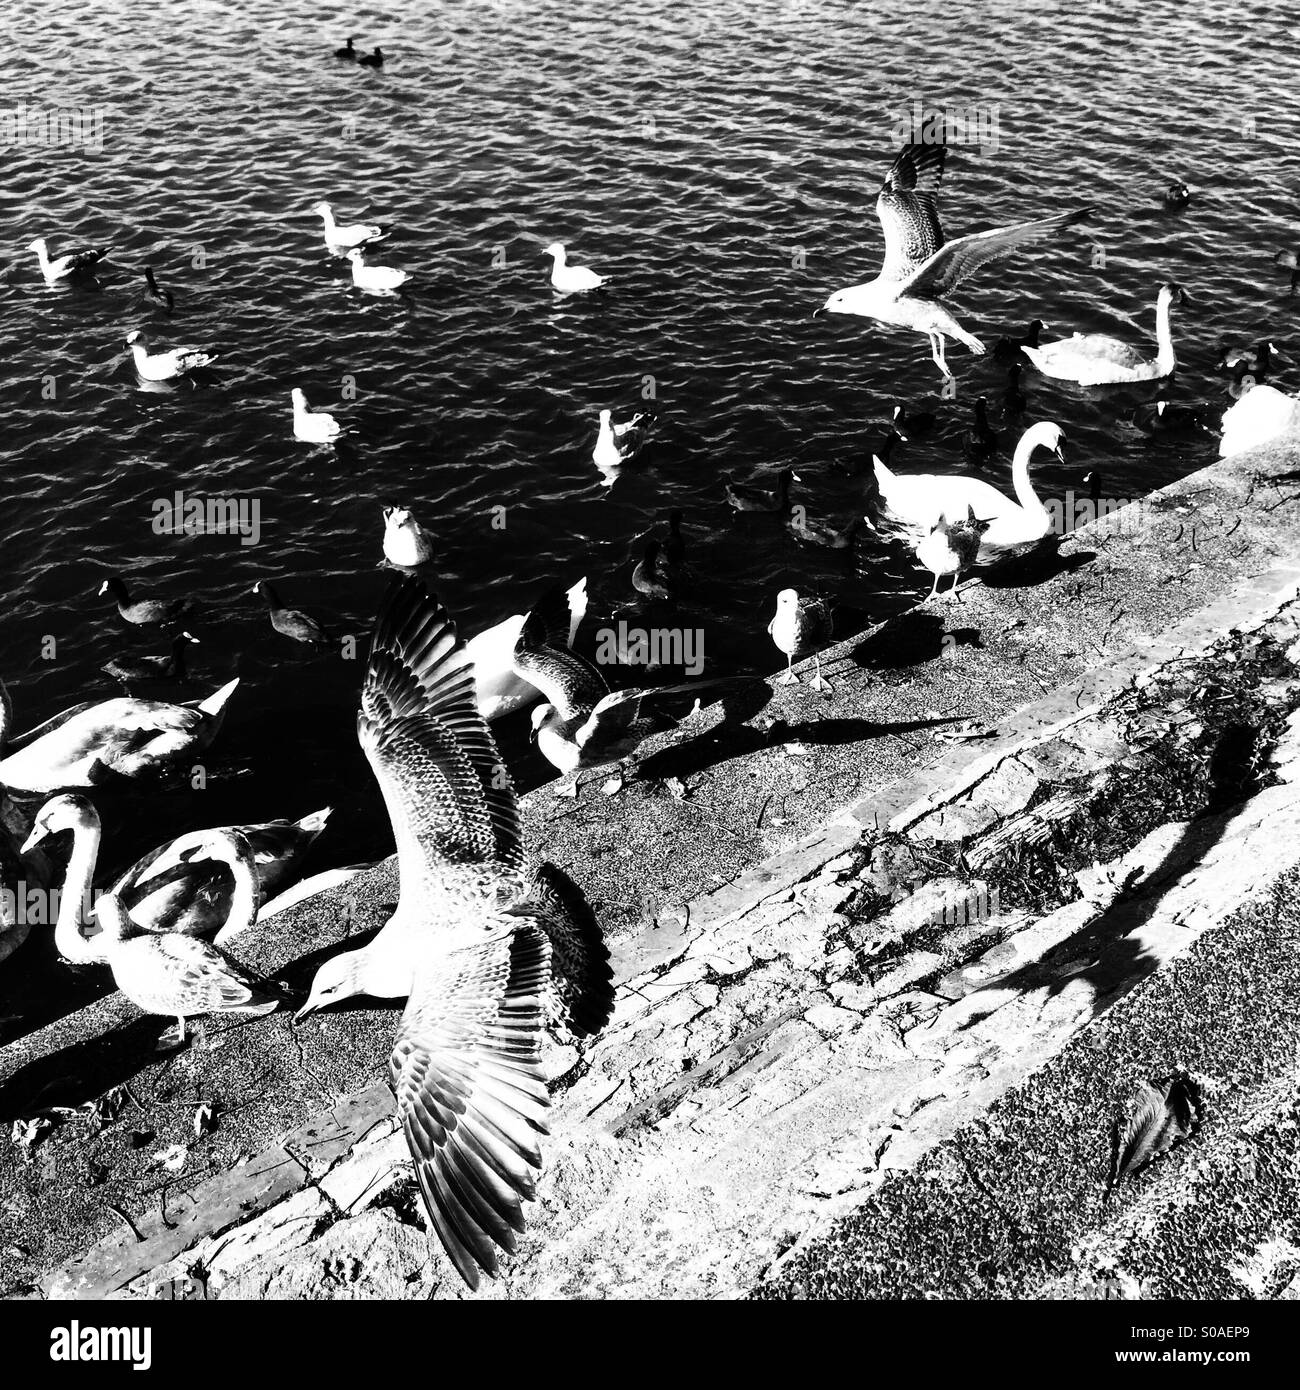 Seagulls on a lake with Swans Stock Photo